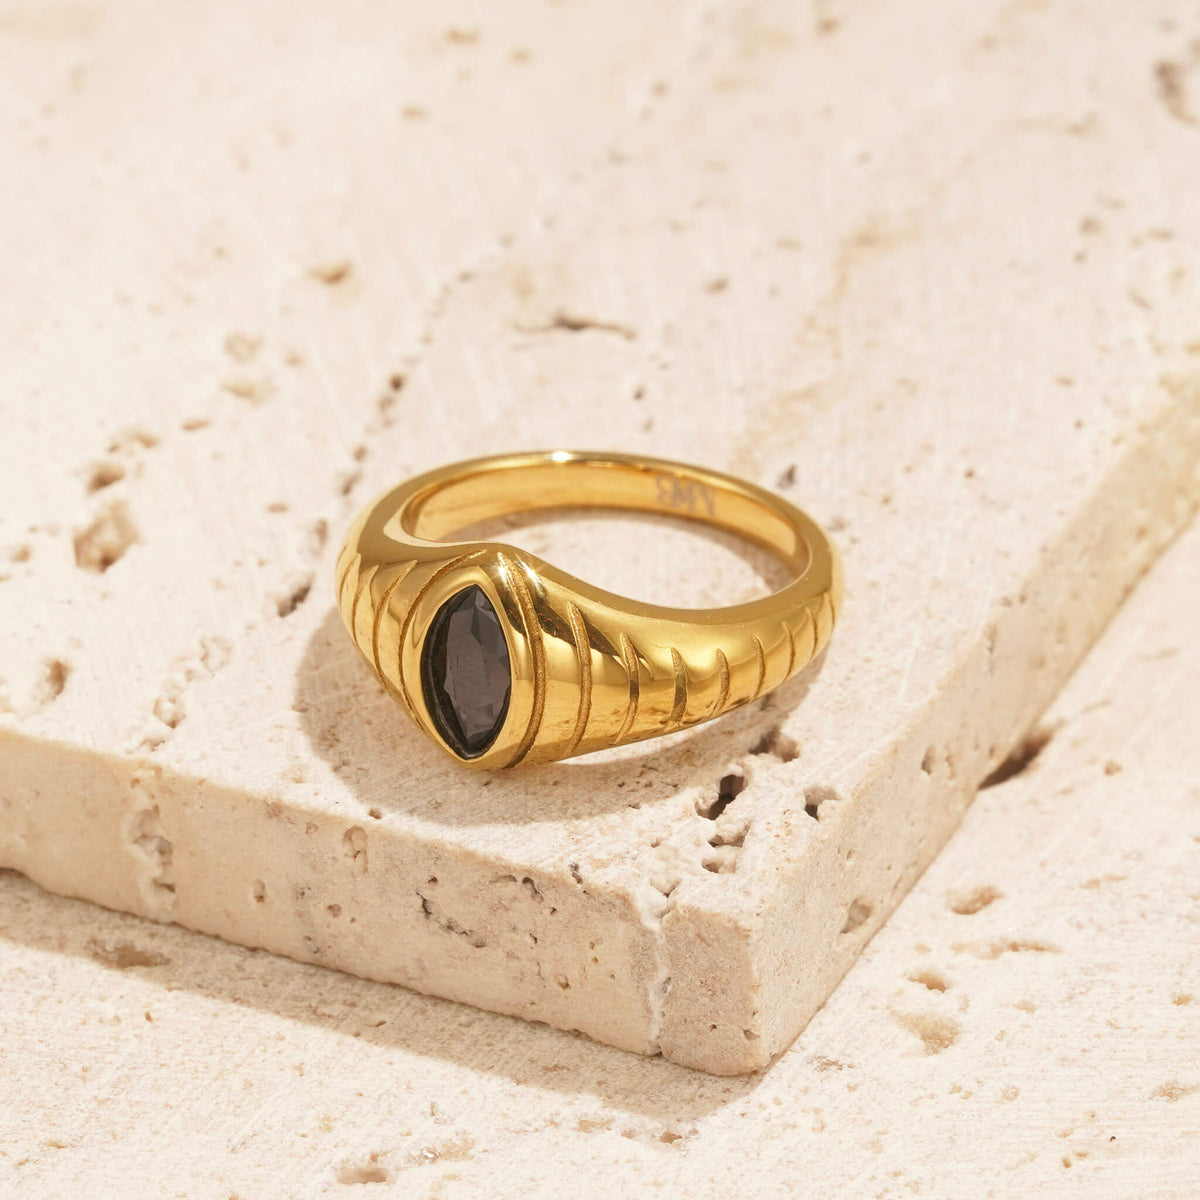 gold ring with black onyx stone which resembles a snakes eye.